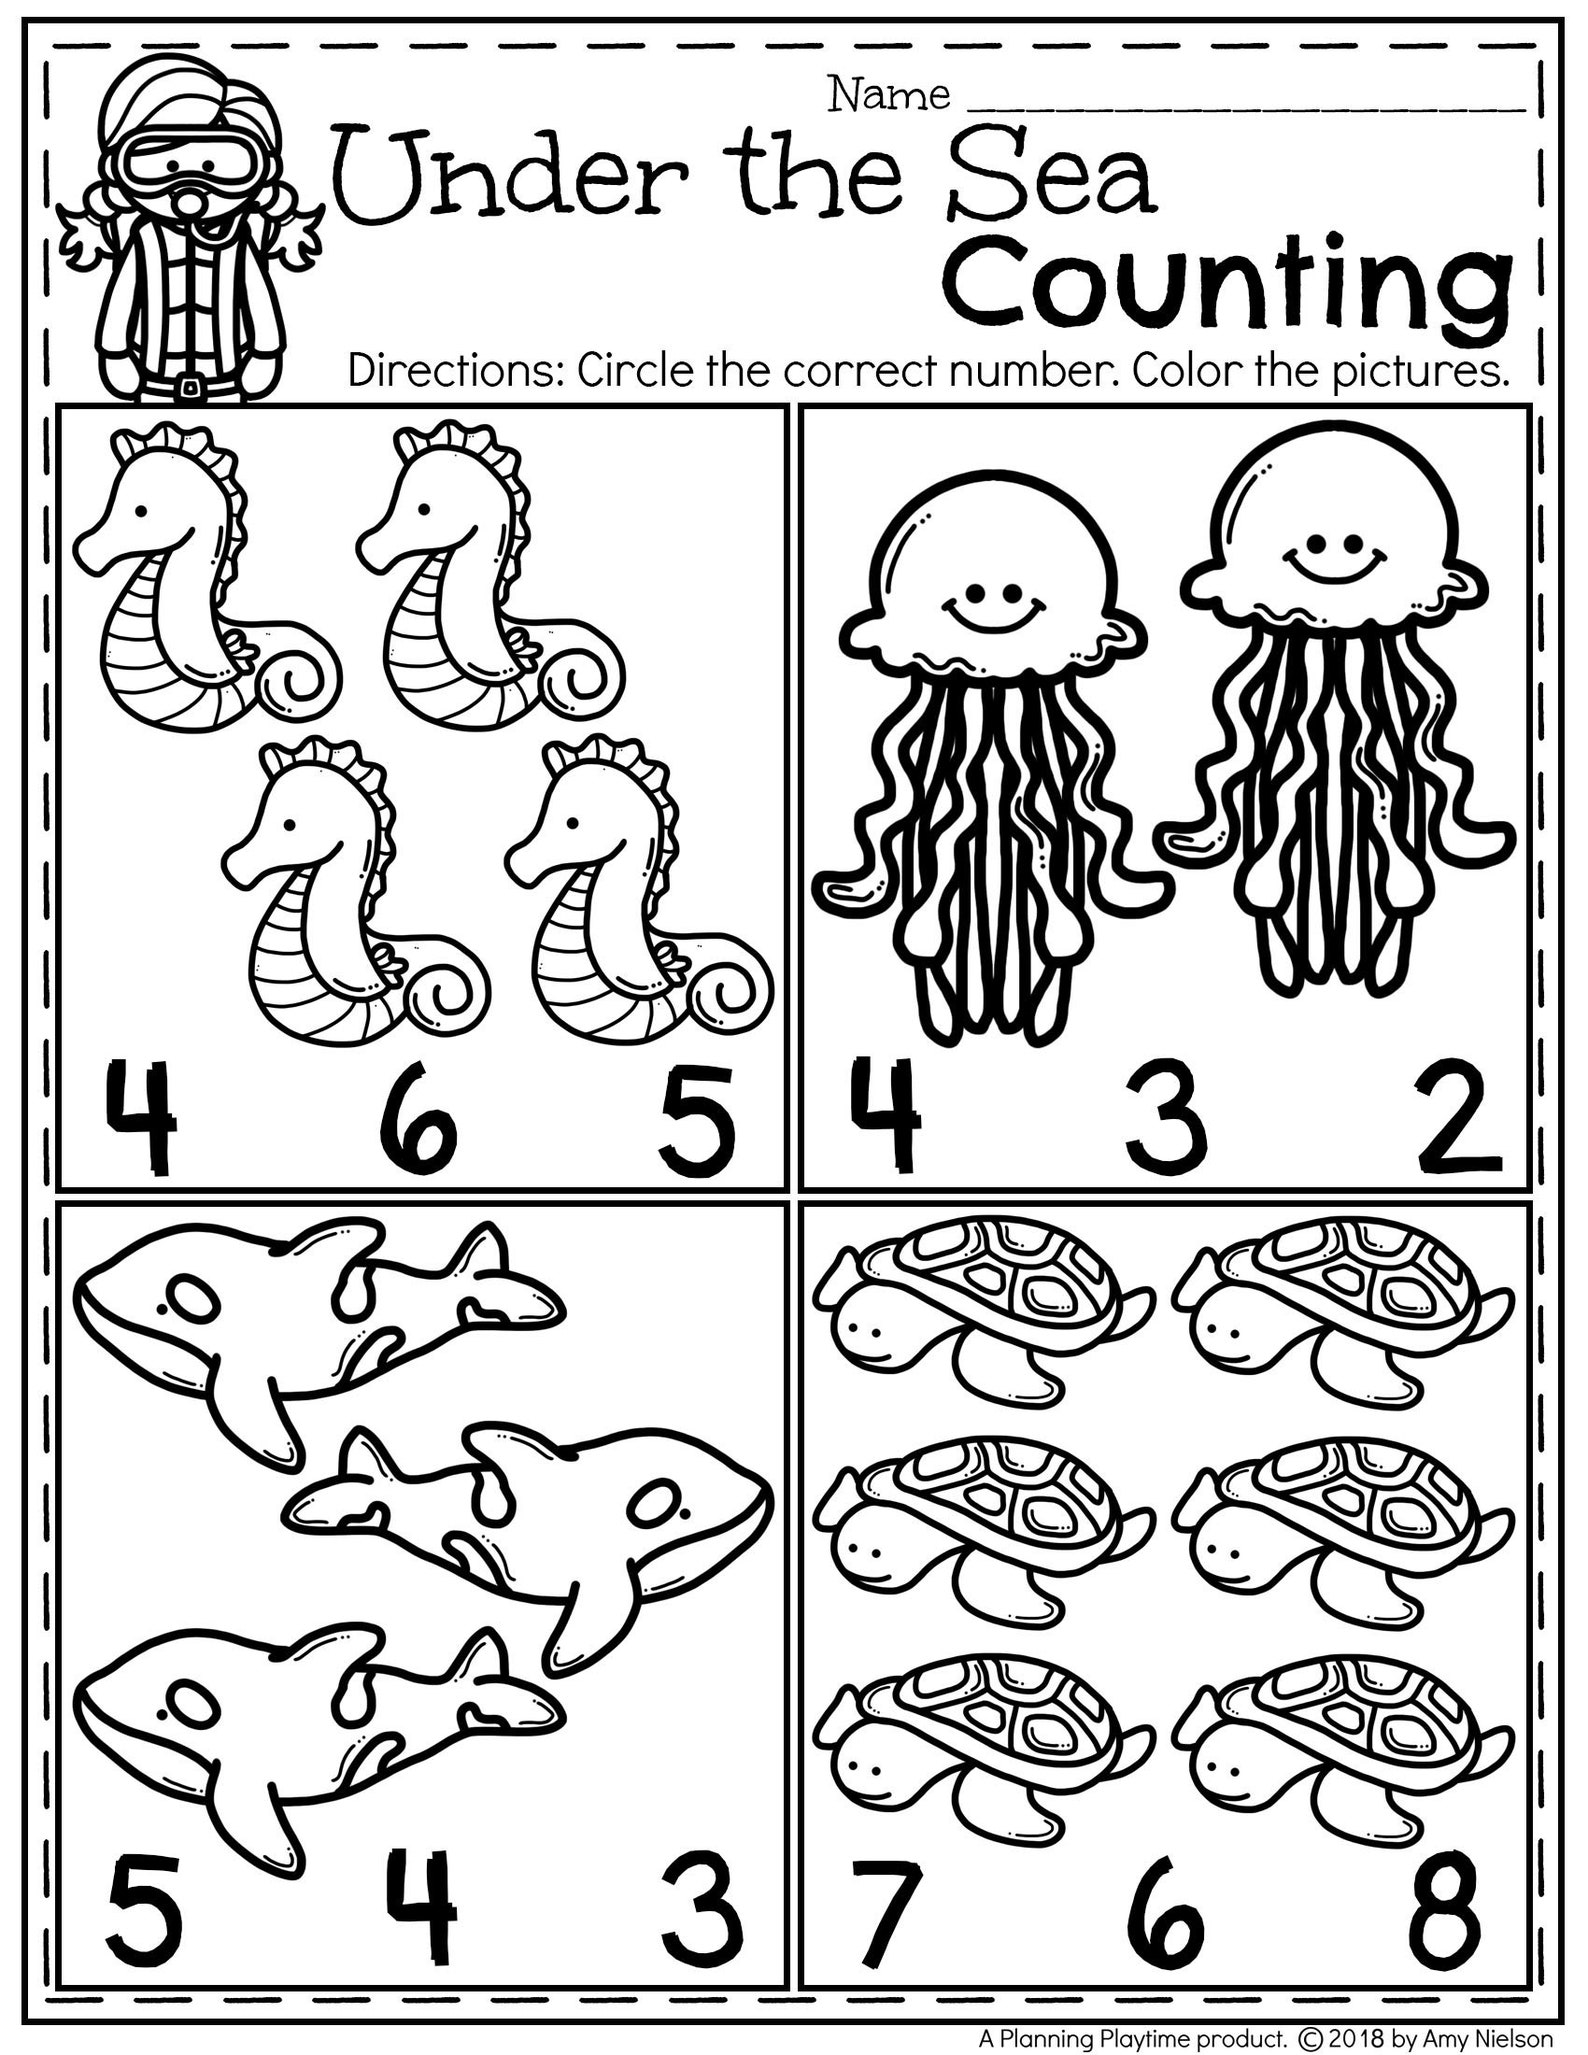 counting-activity-preschool-printables-learning-numbers-number